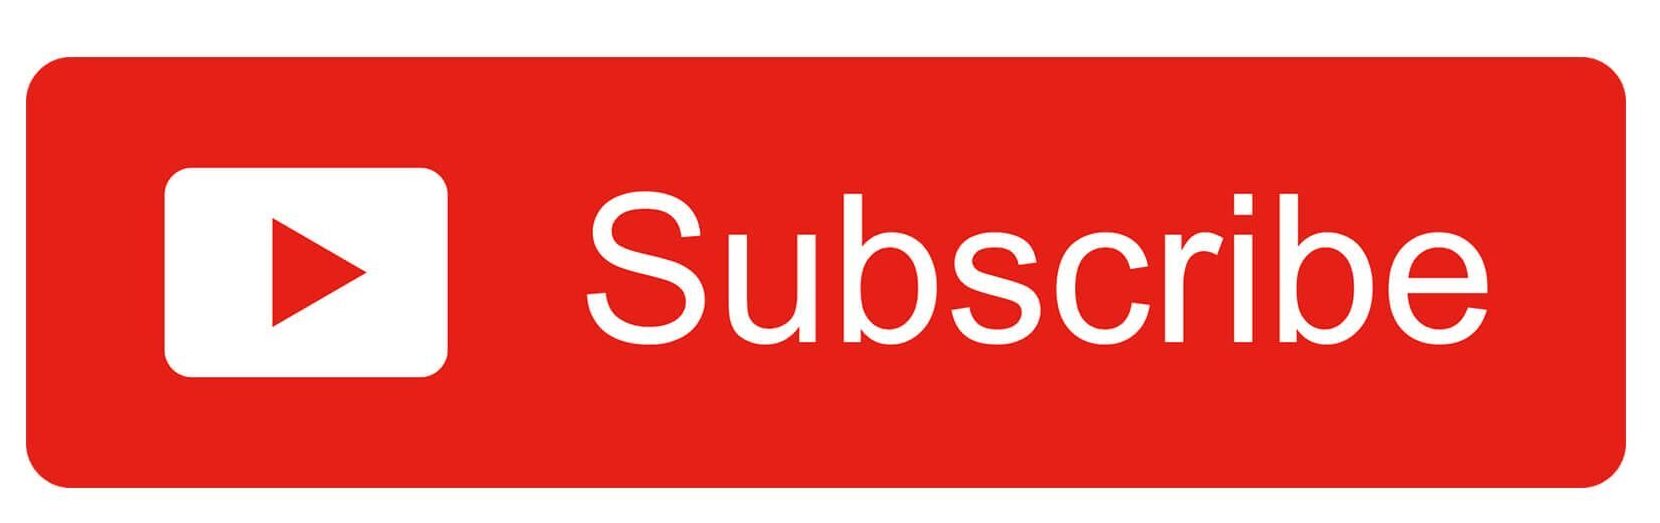 Subscribe to my YouTube Channel